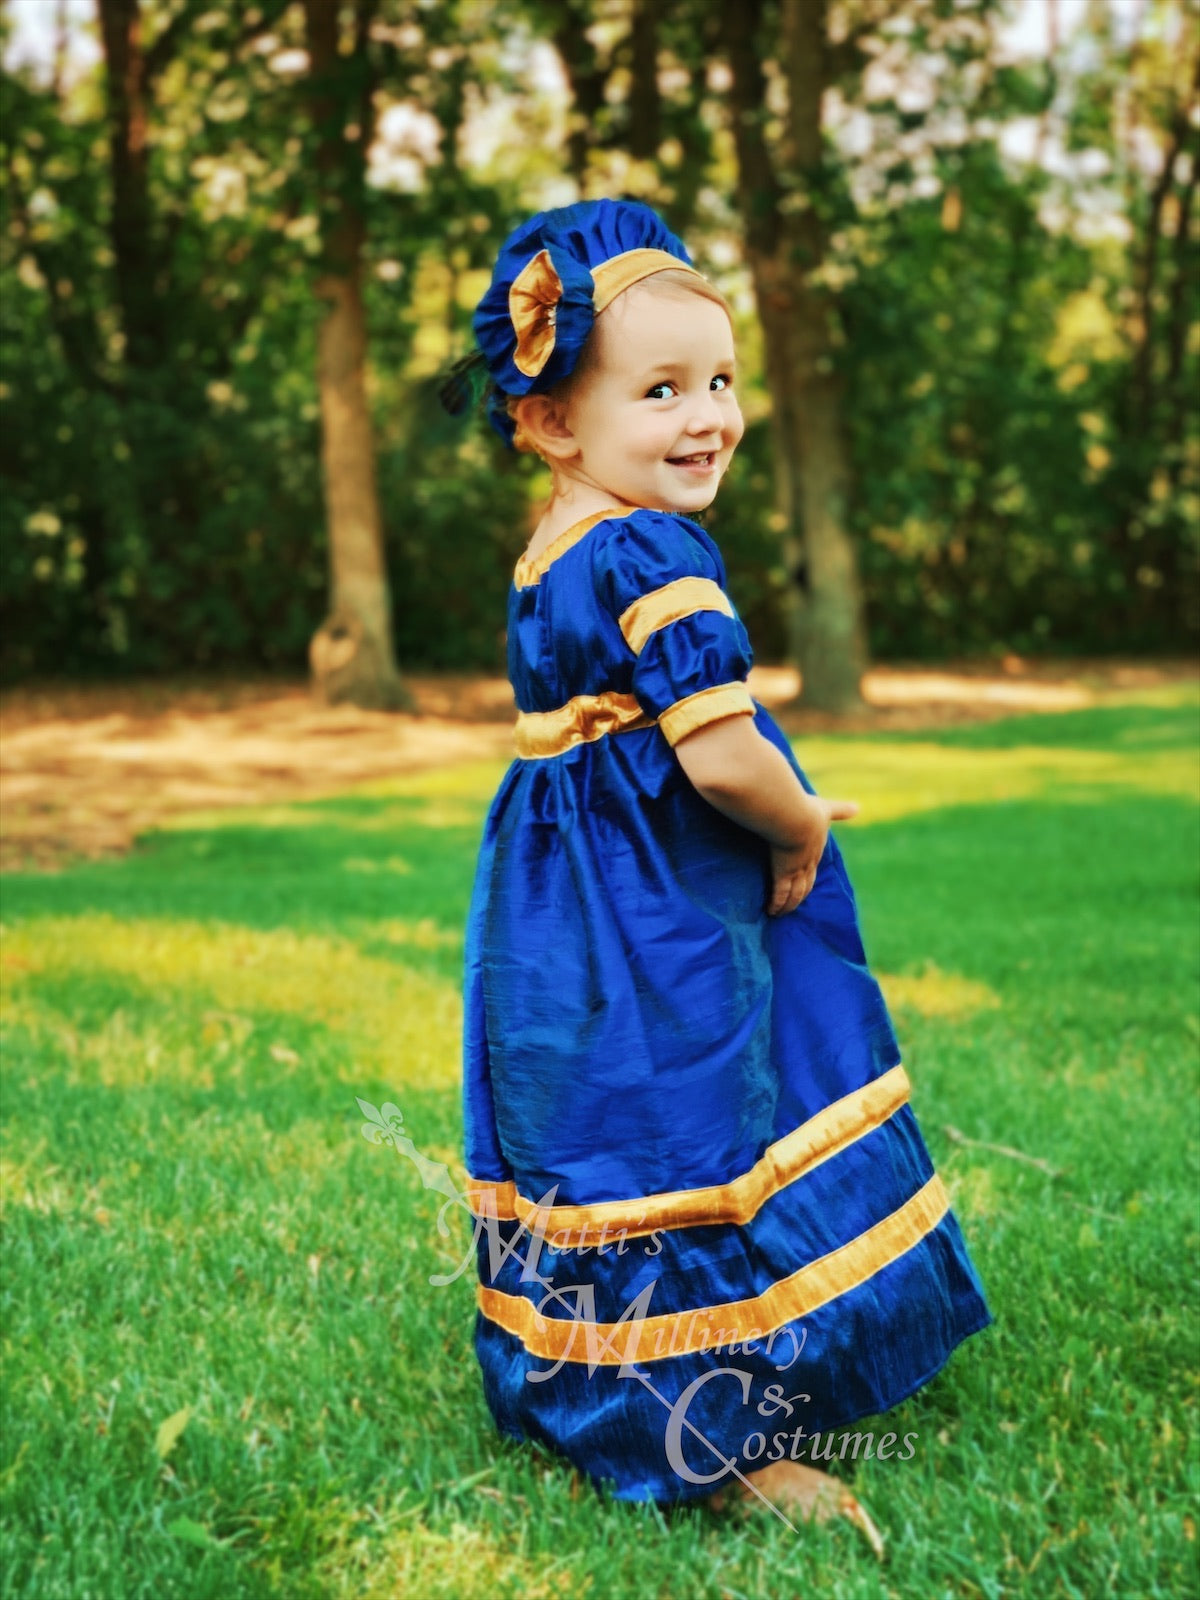 Childrens Regency Ball Gown Court Dress Outfit with dress and Tam CUSTOM size and color